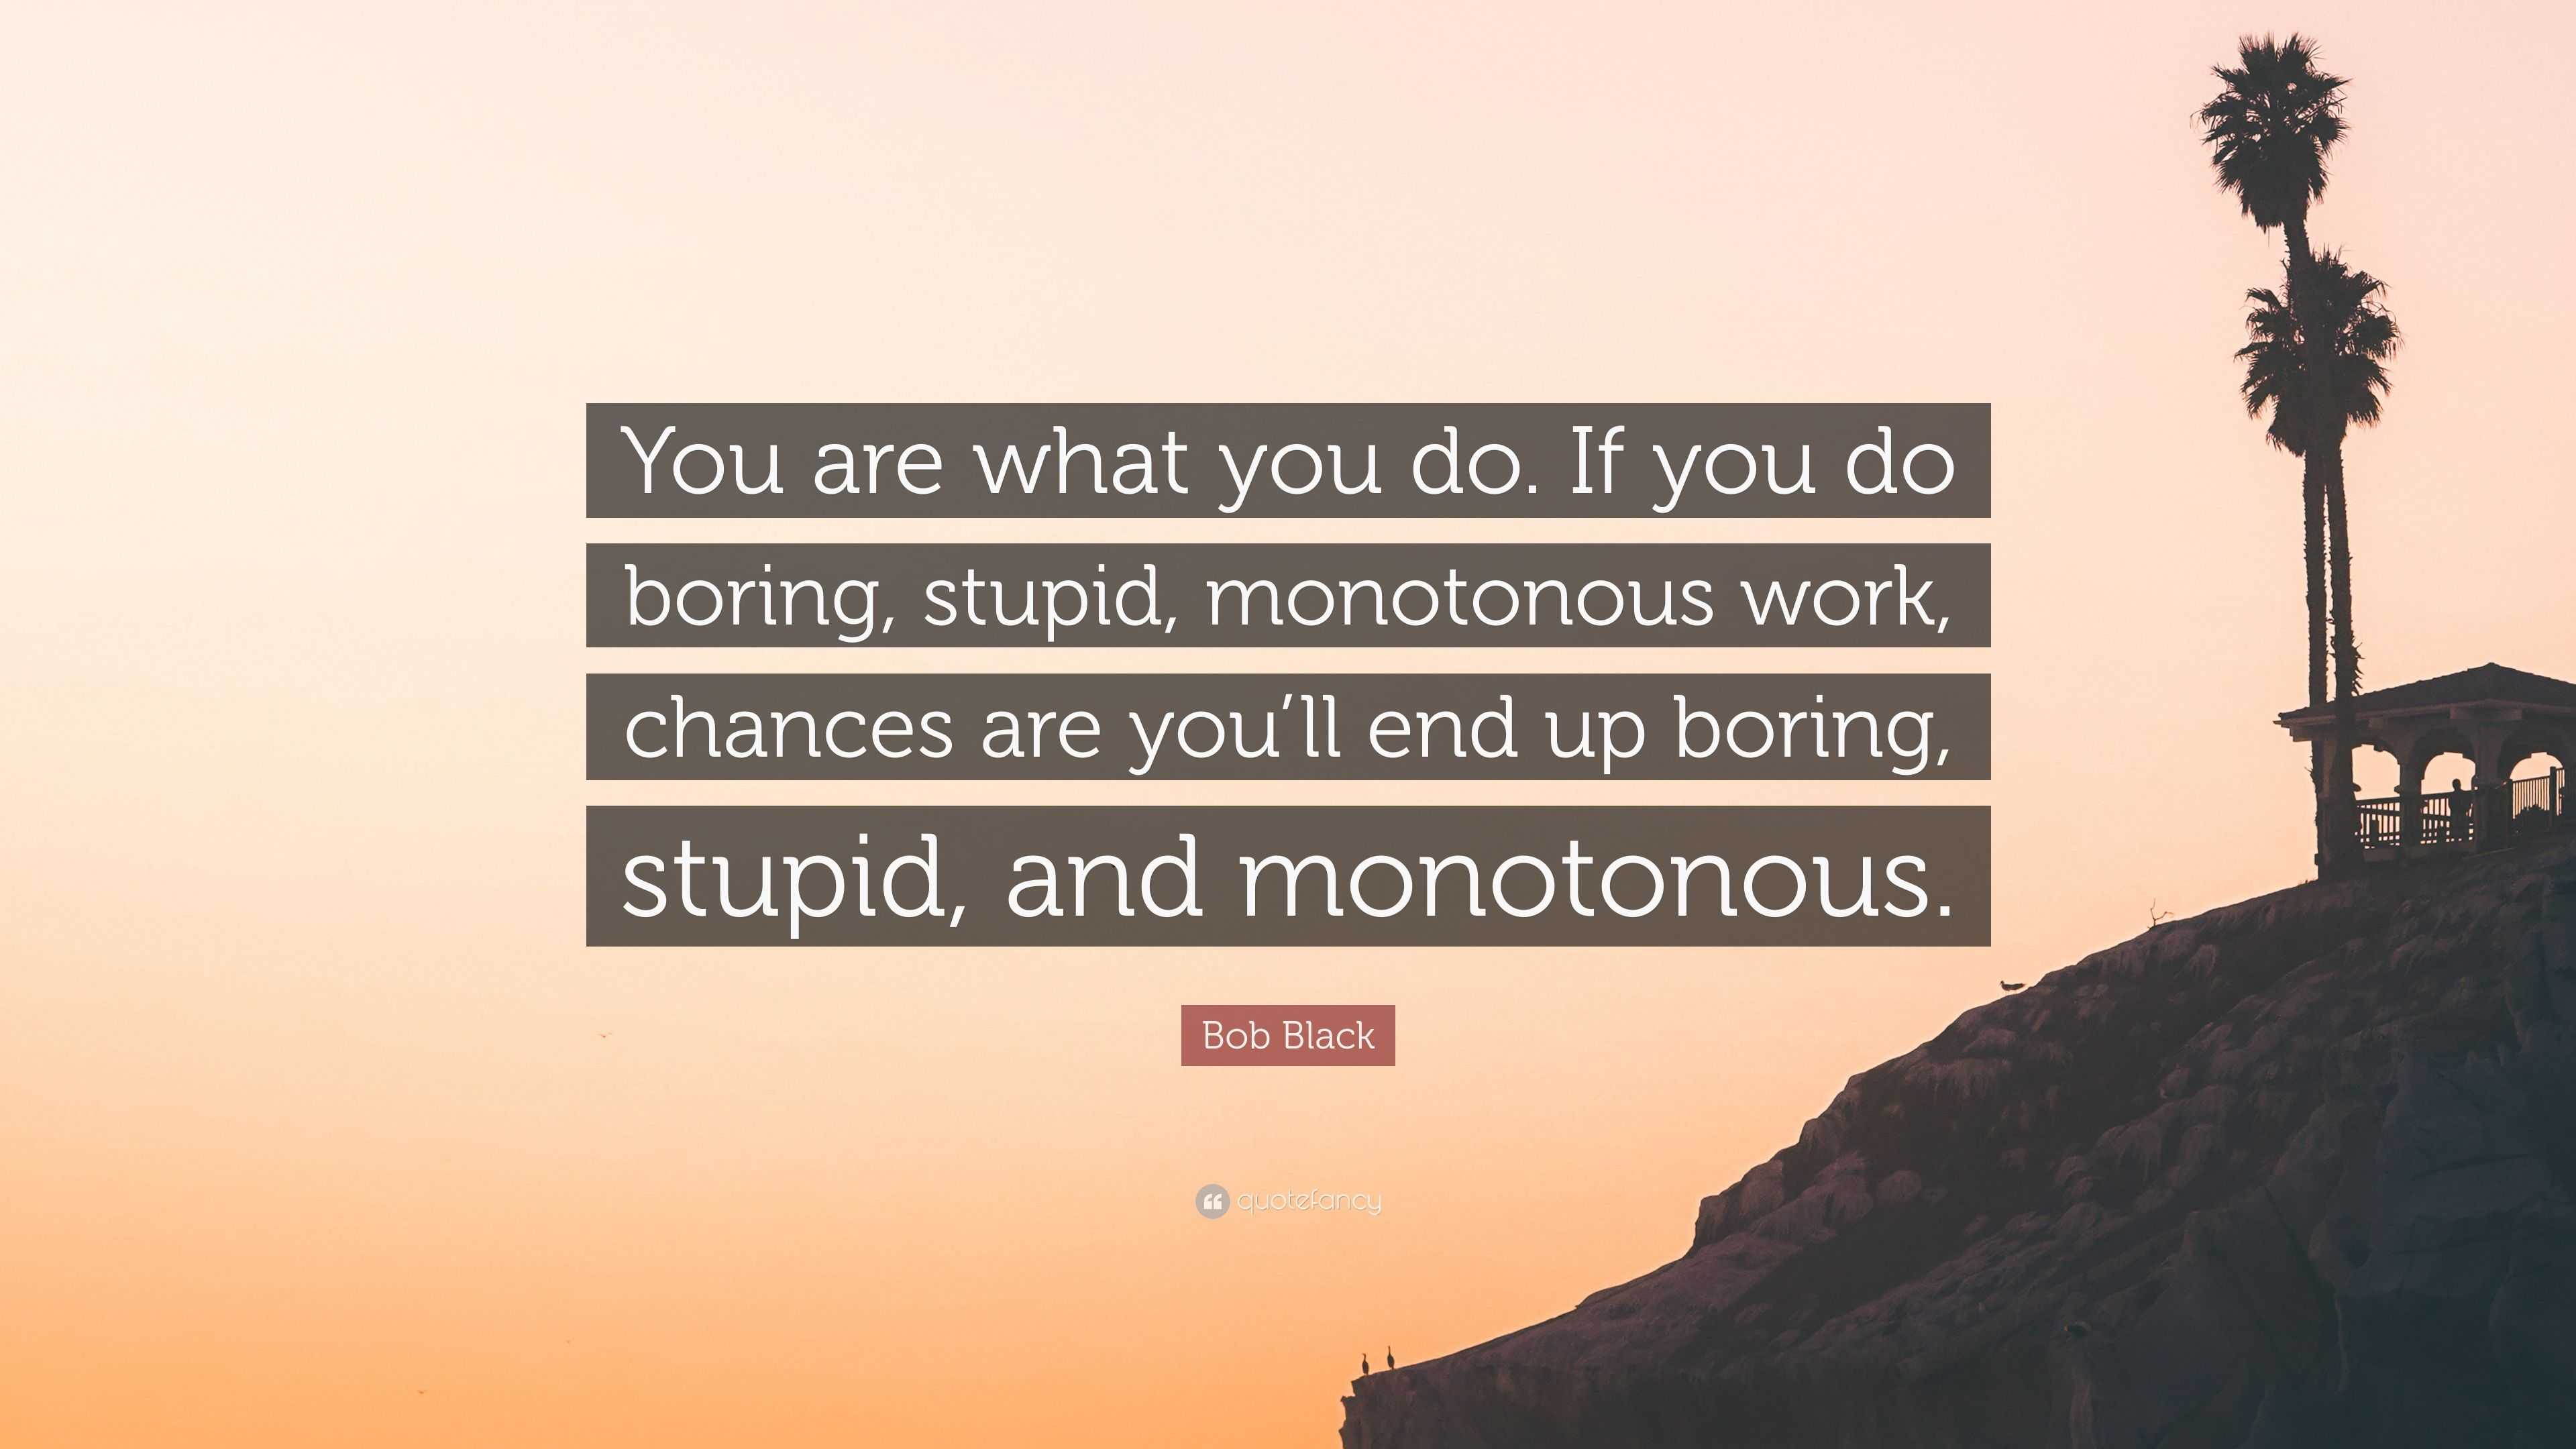 Bob Black Quote: "You are what you do. If you do boring, stu